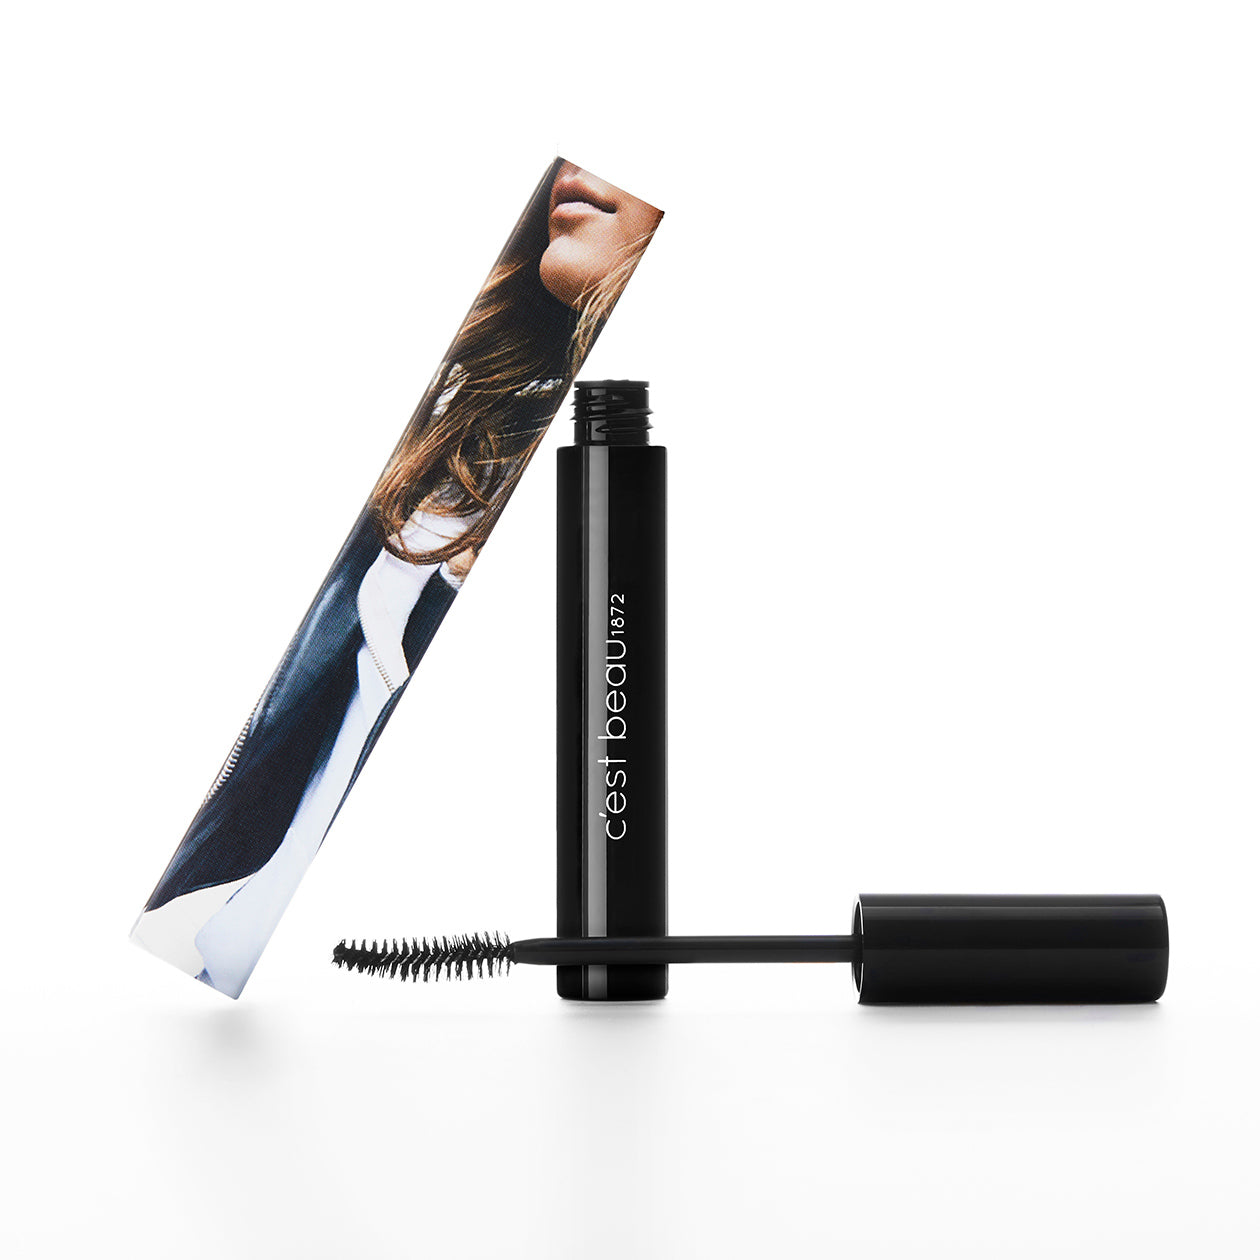 c'est beau1872 beauty - don't forget about me mascara in black